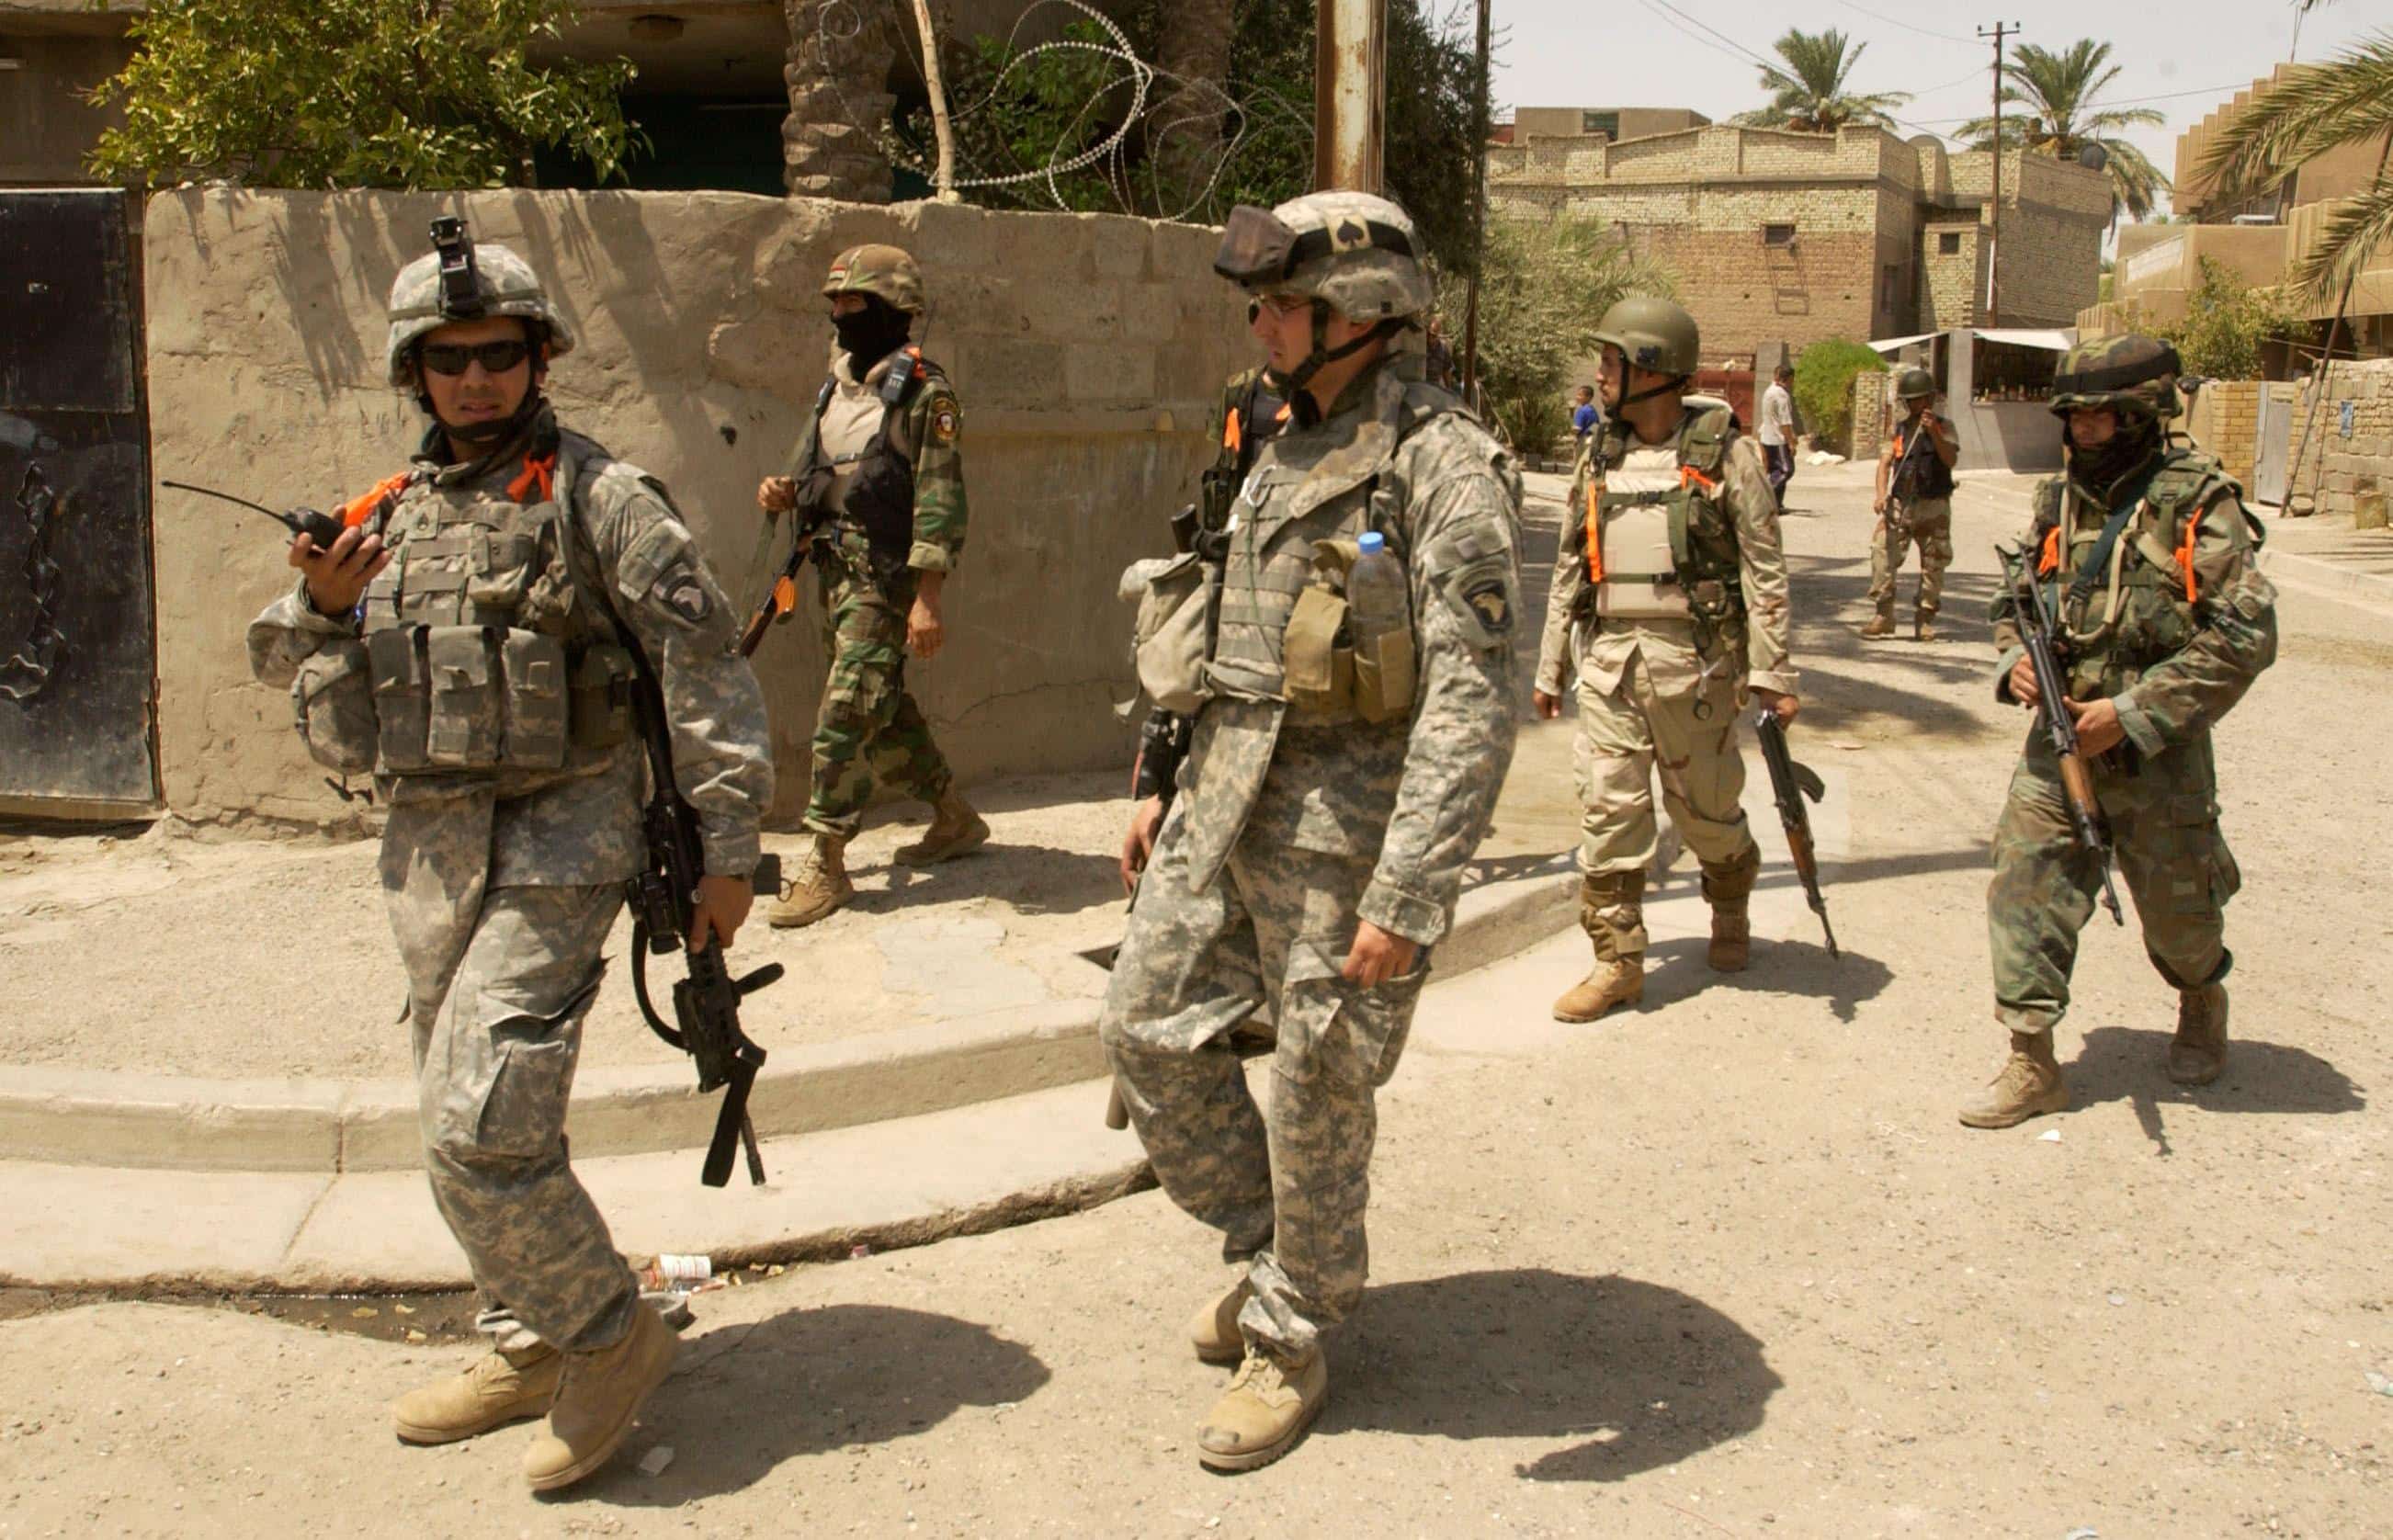 Soldiers with the 2nd Battalion, 506th Infantry Regiment, walk through the streets of Al Dora during Operation Together Freedom, Aug. 10. U.S. troops along with Iraqi National Police searched and cleared homes in Dora looking fo weapons, explosives, caches and ammunition.